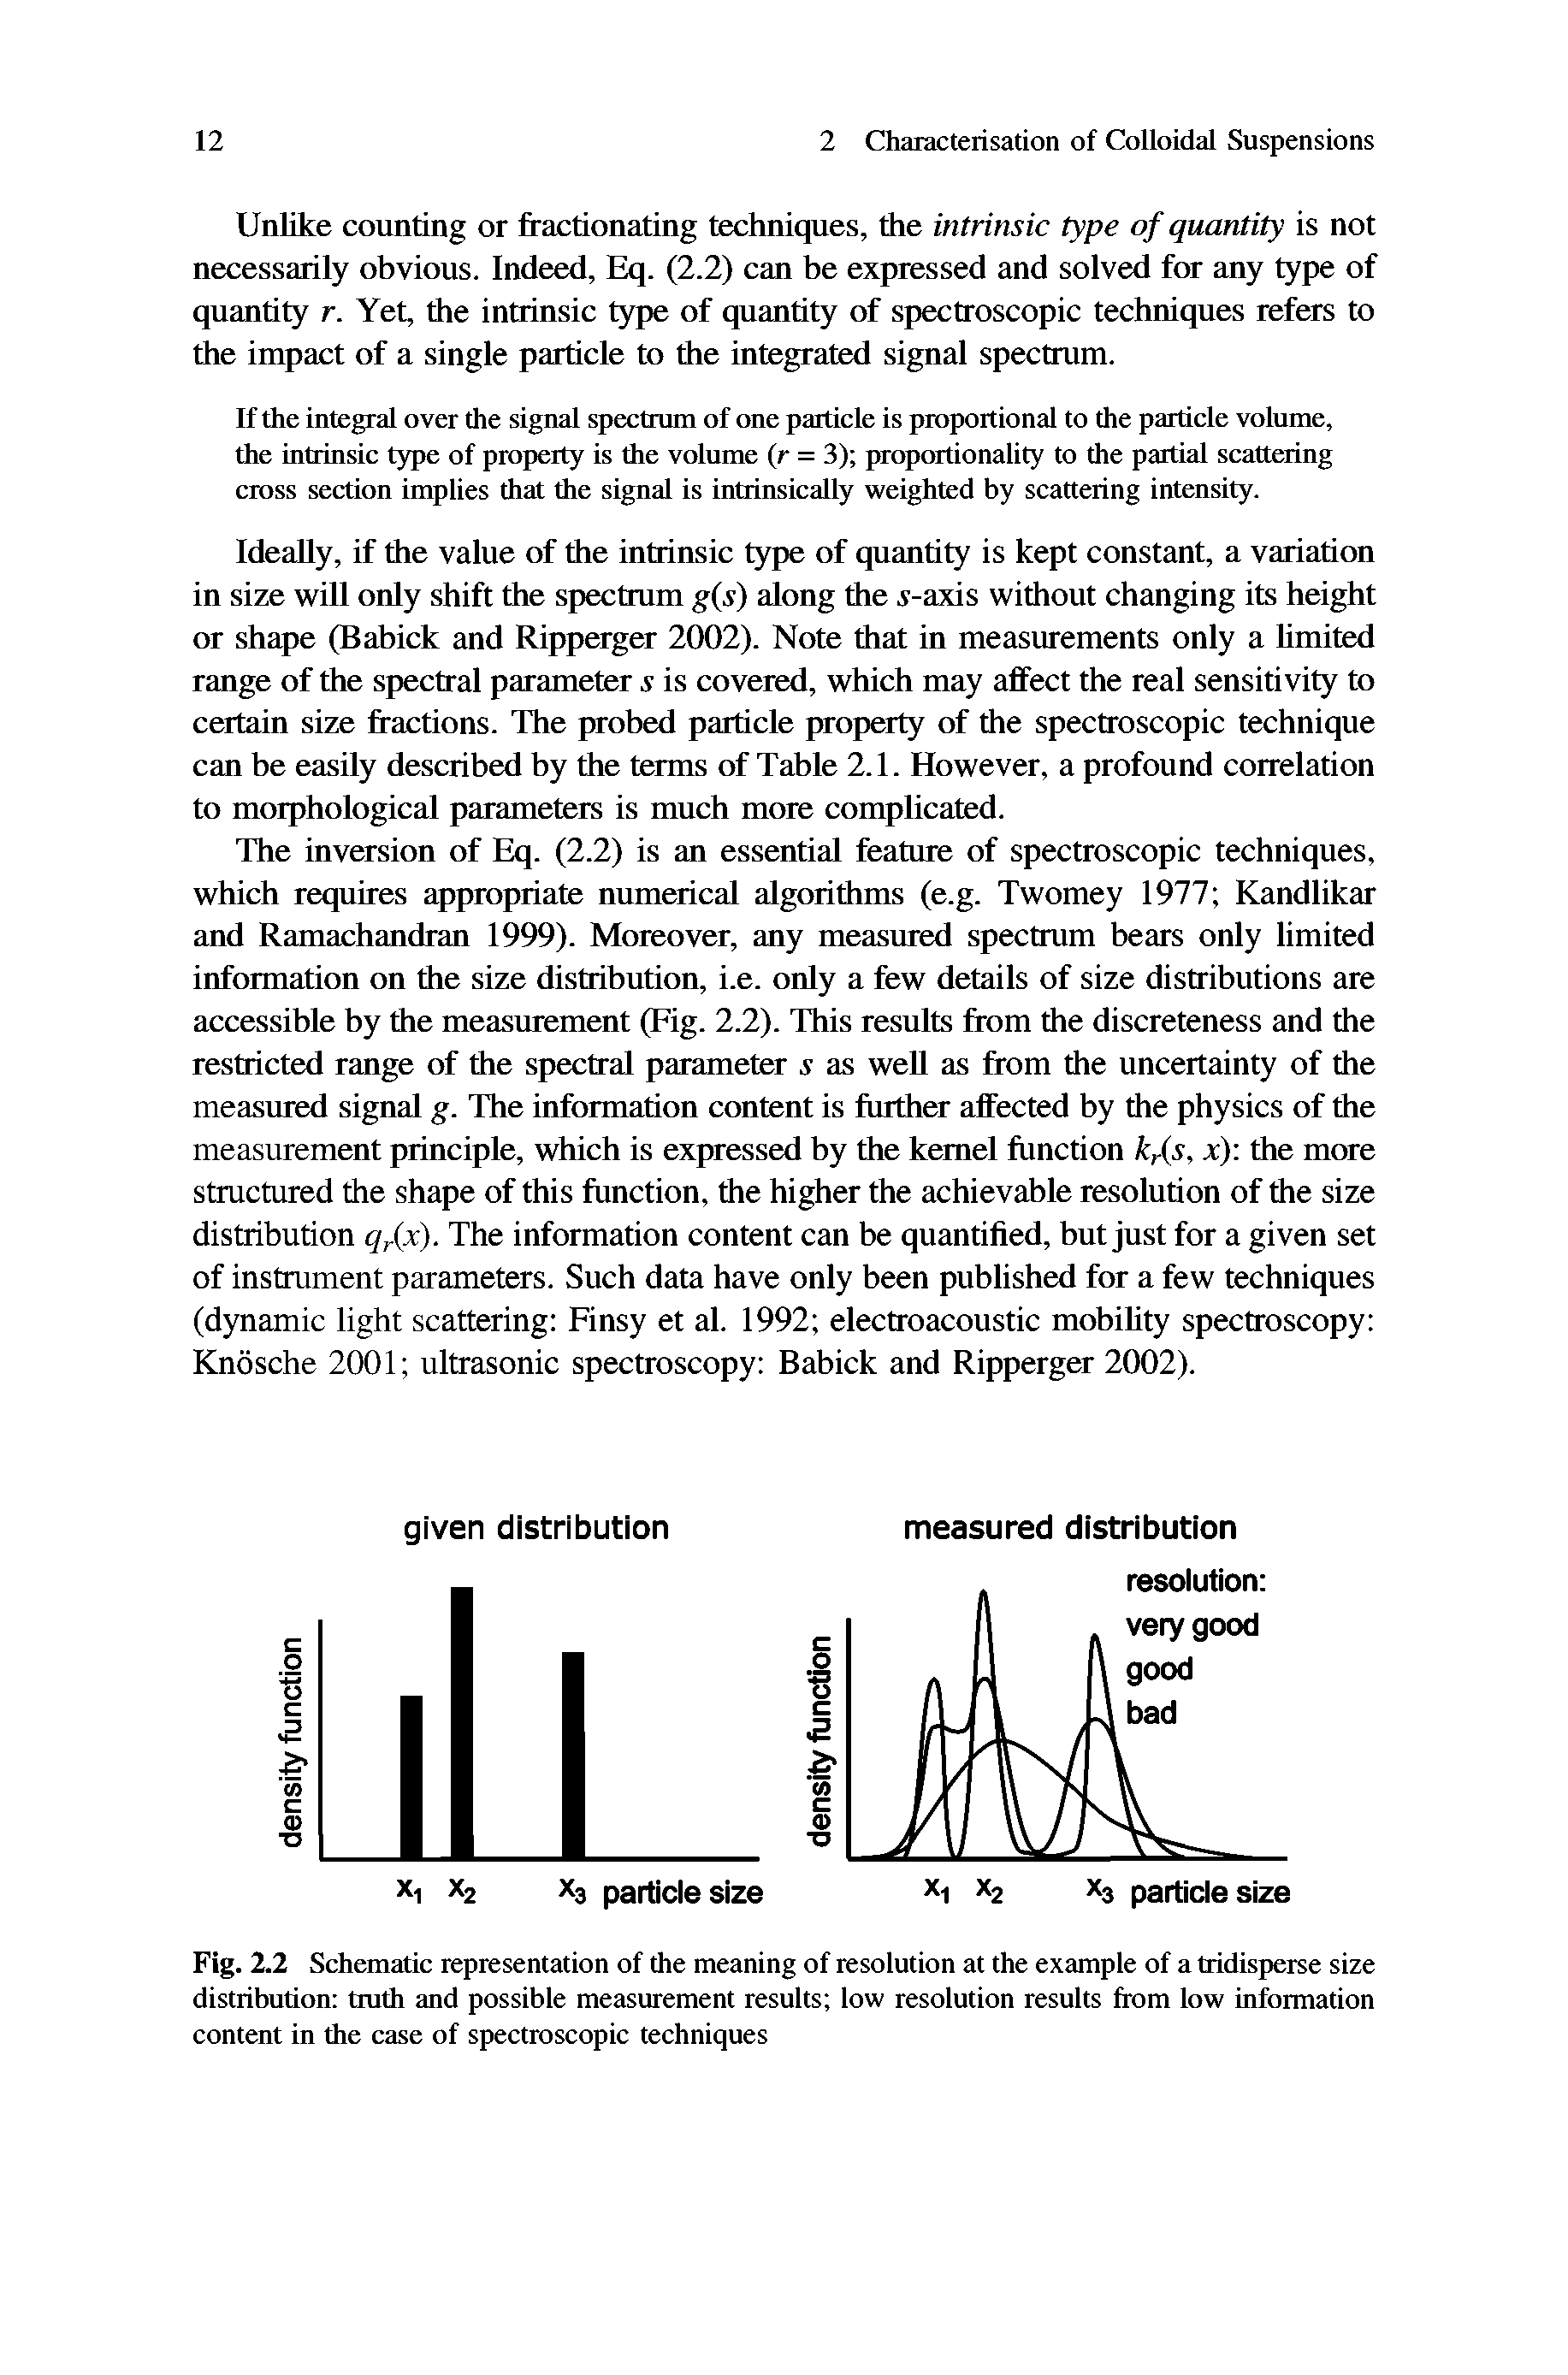 Fig. 2.2 Schematic representation of the meaning of resolution at the example of a tridisperse size distribution tmth and possible measurement results low resolution results from low information content in the case of spectroscopic techniques...